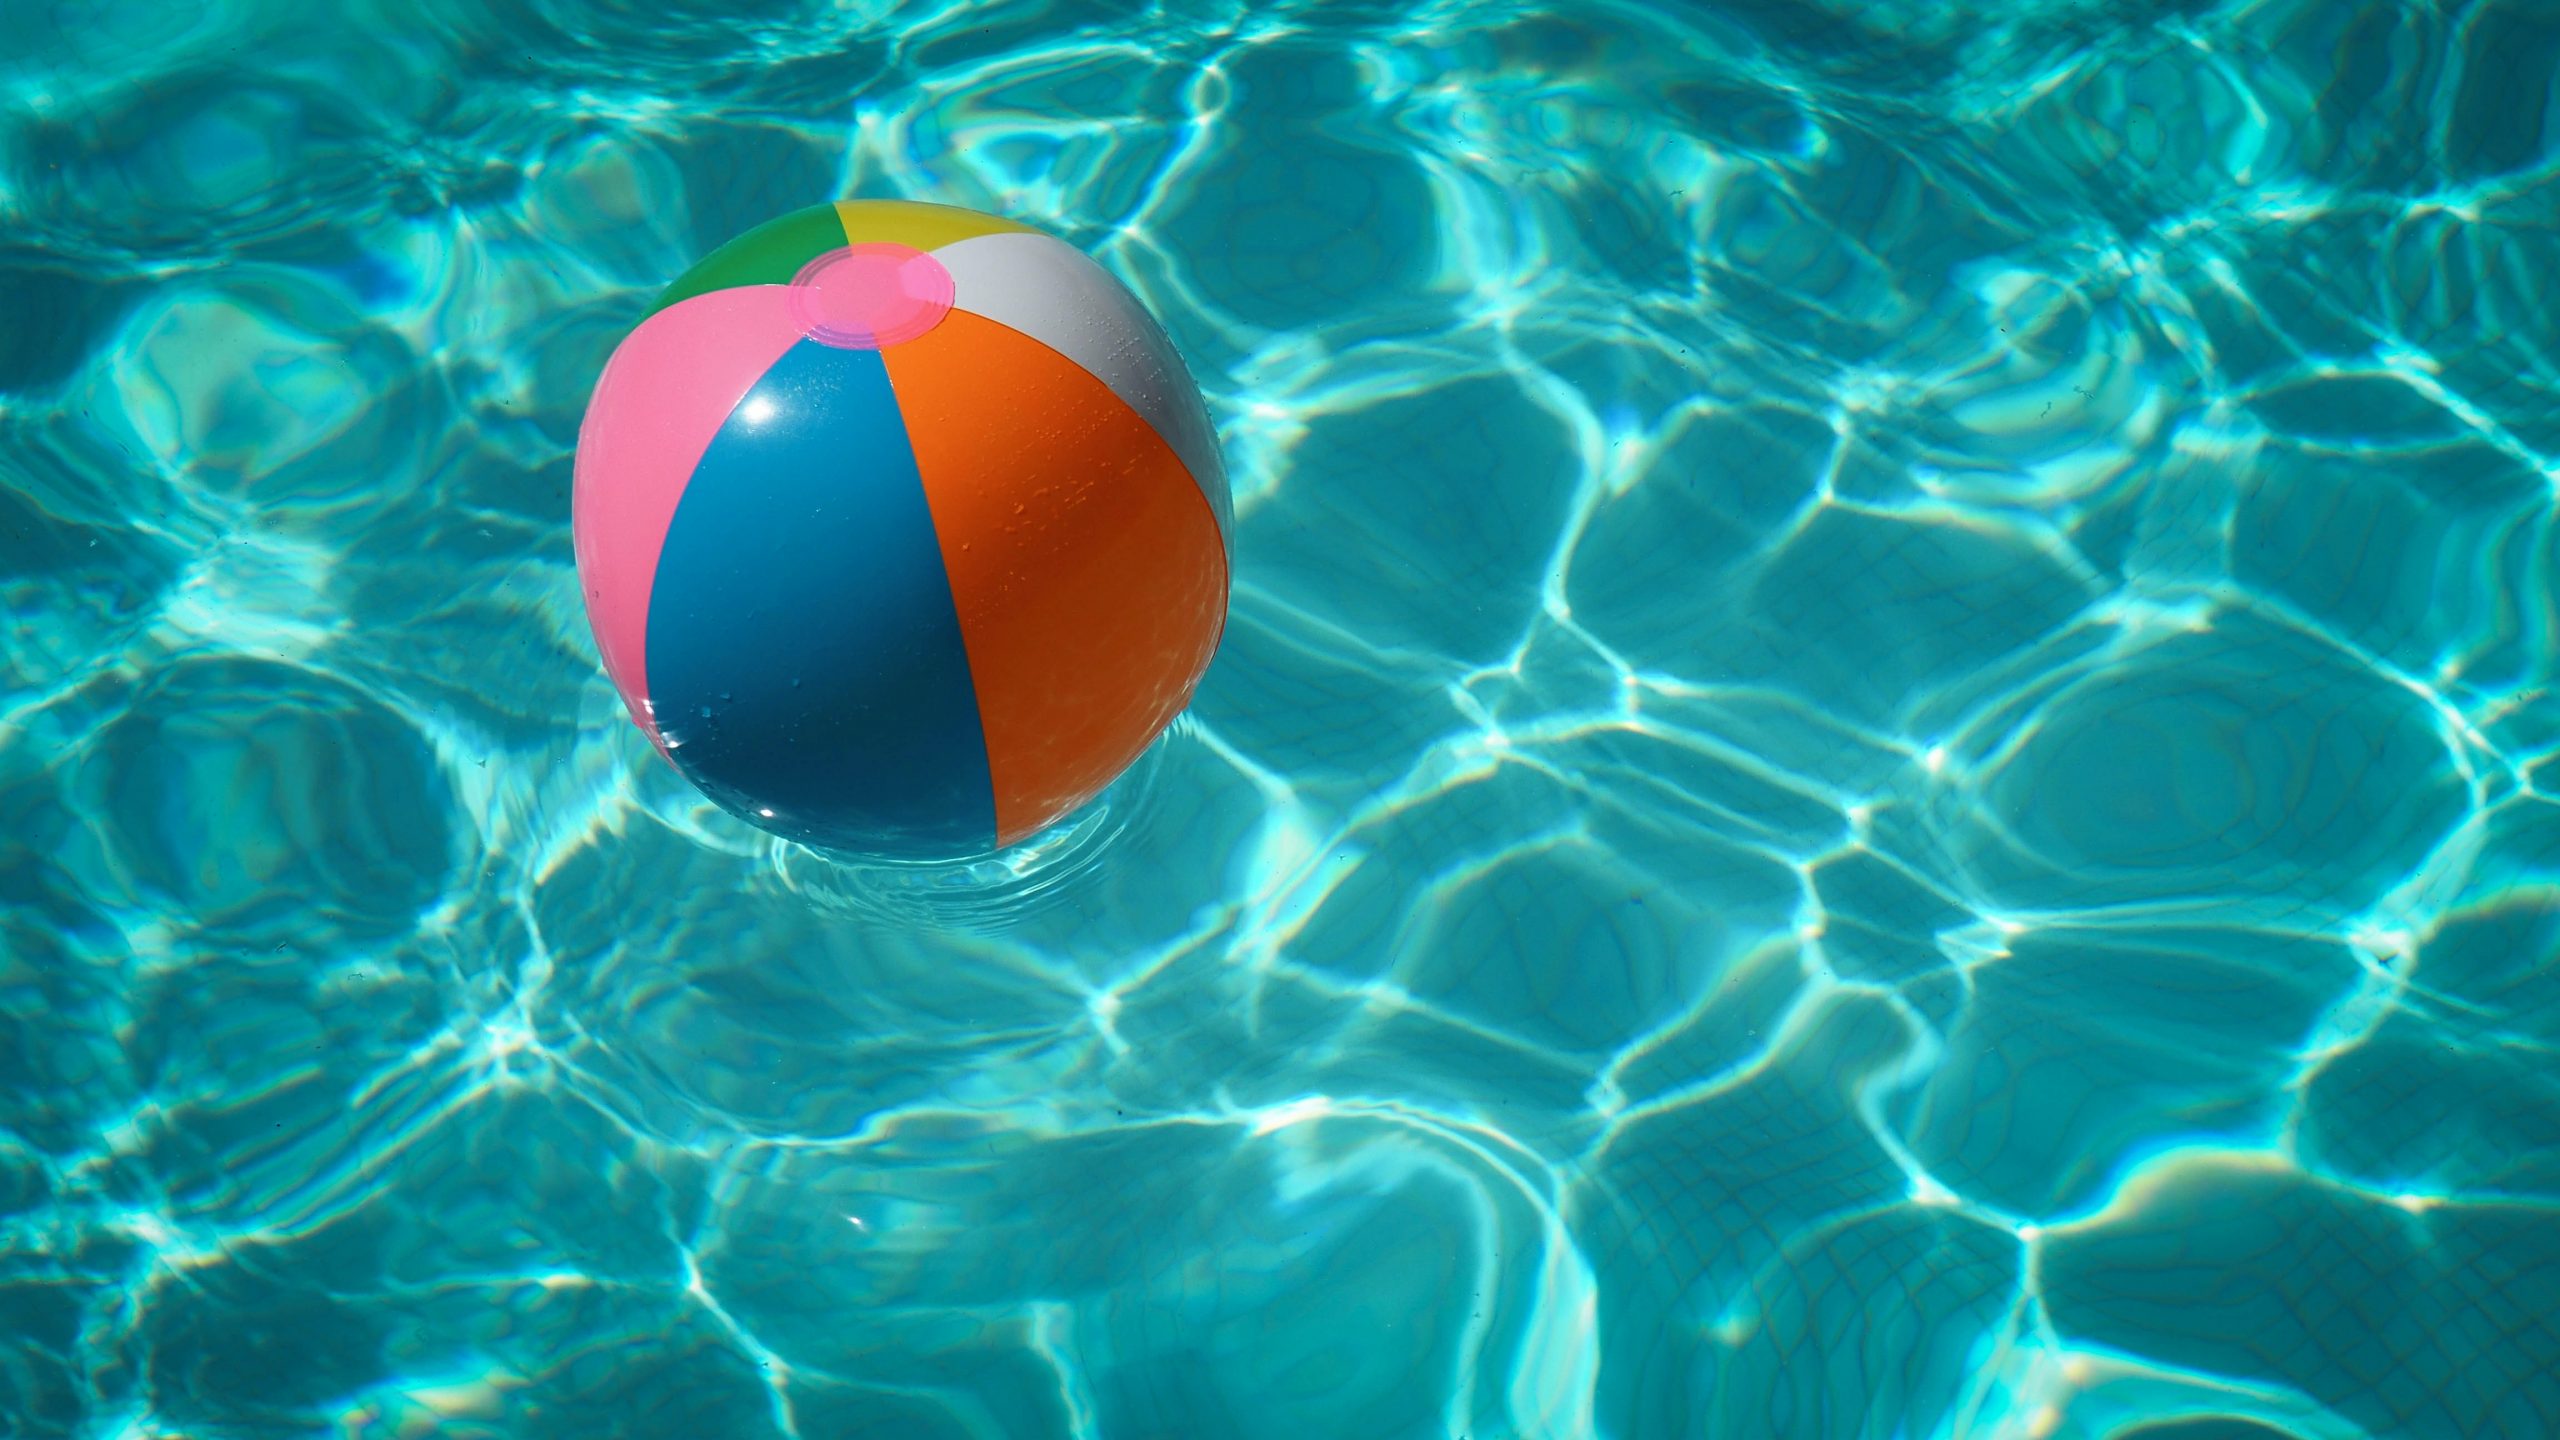 Beach Ball Floating in a Pool